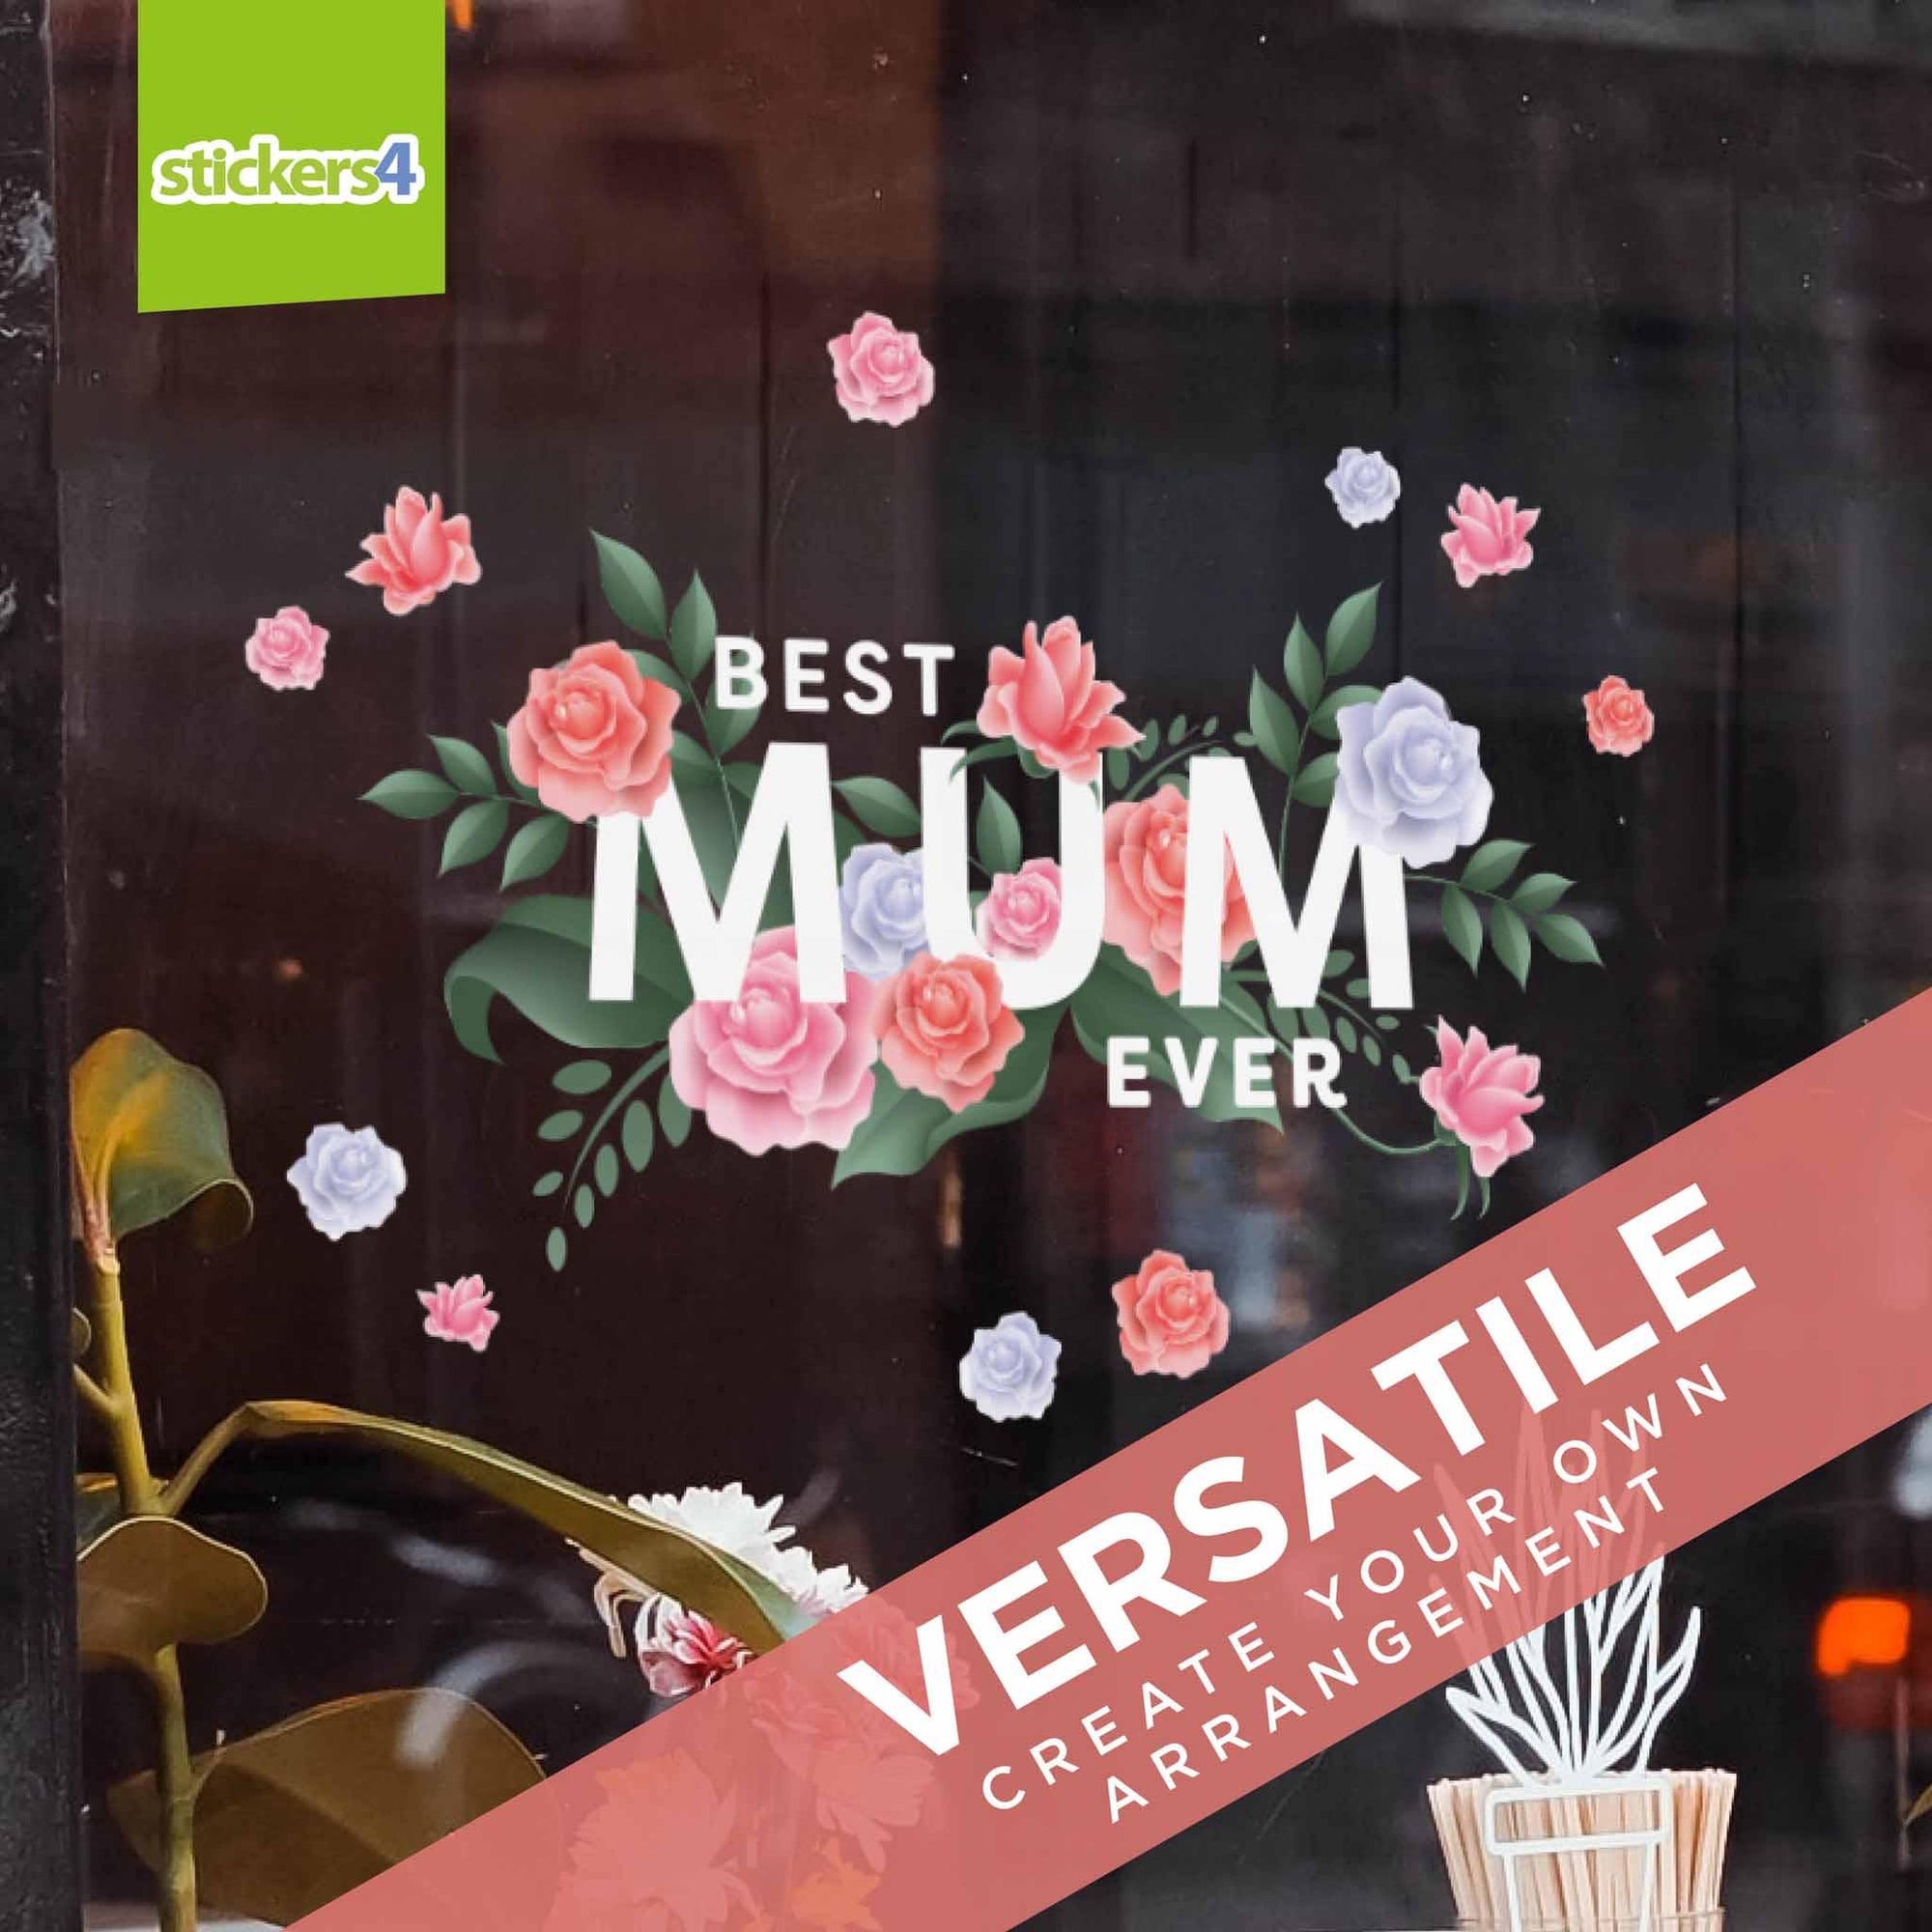 Best Mum Ever with Roses Window Stickers Mother's Day Display